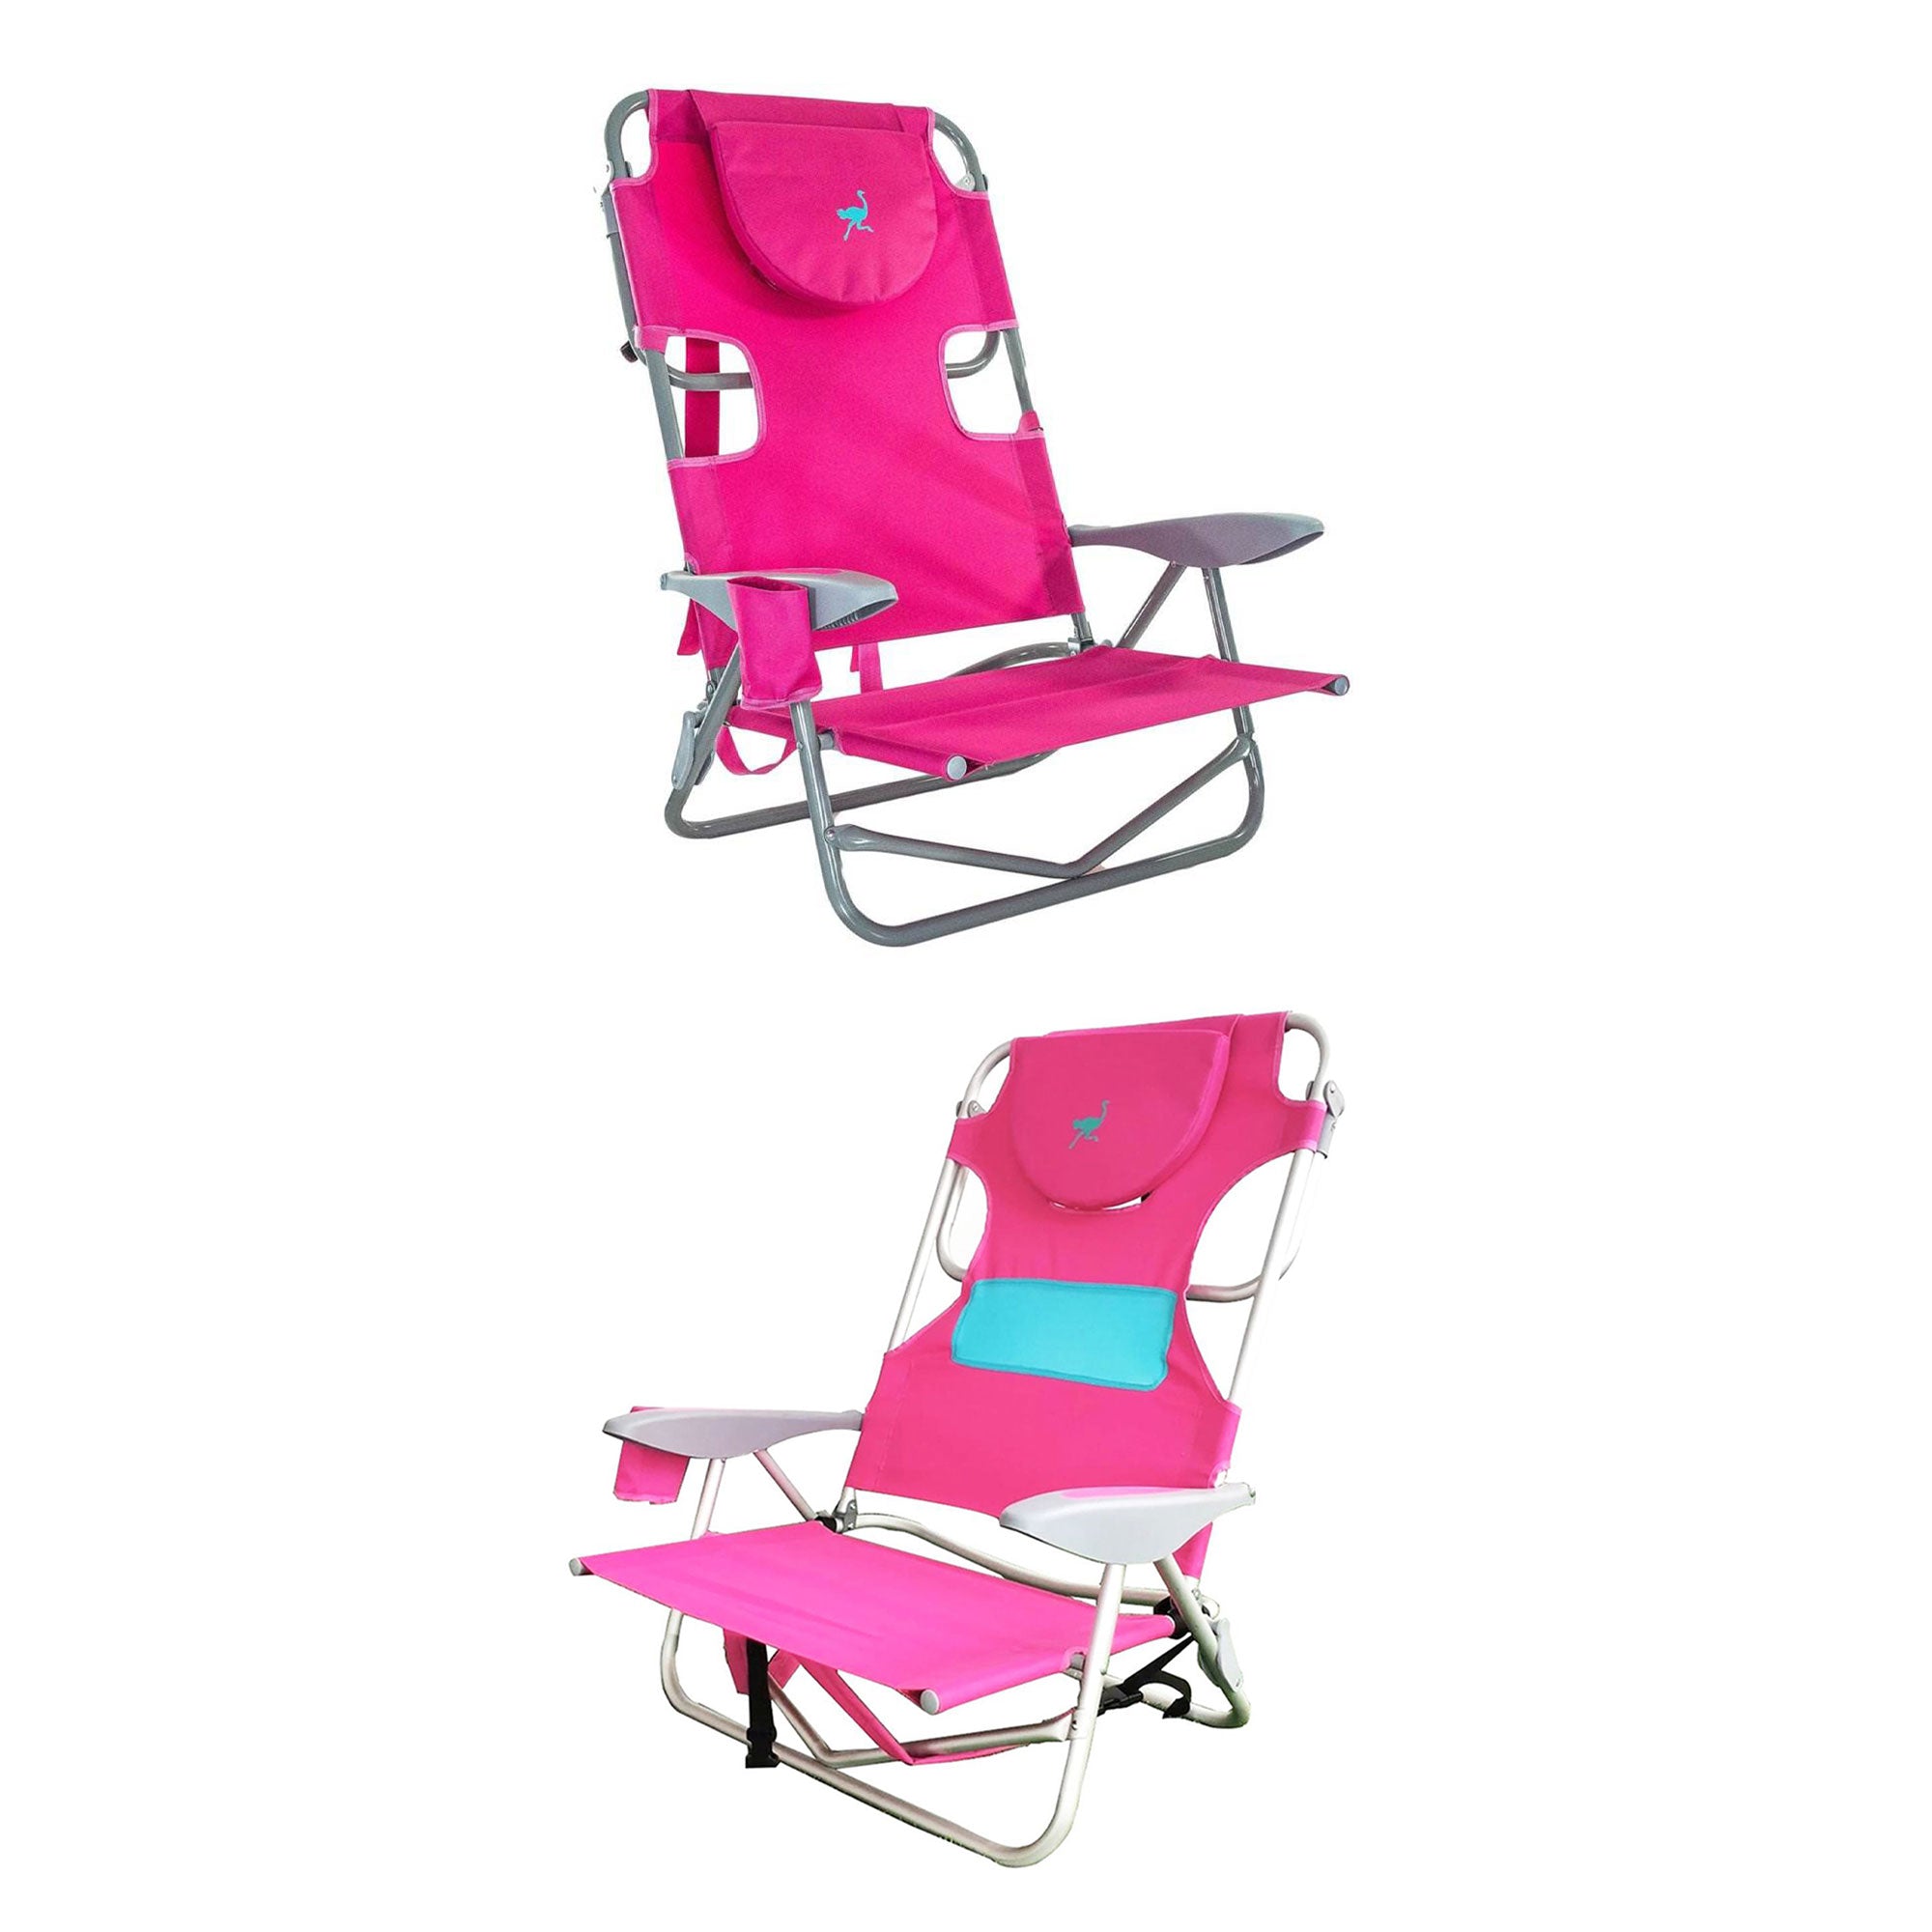 Ostrich-on-Your-Back-Beach-Chair-and-Ladies-Comfort-on-Your-Back-Chair,-Pink-Chairs-&-Seating